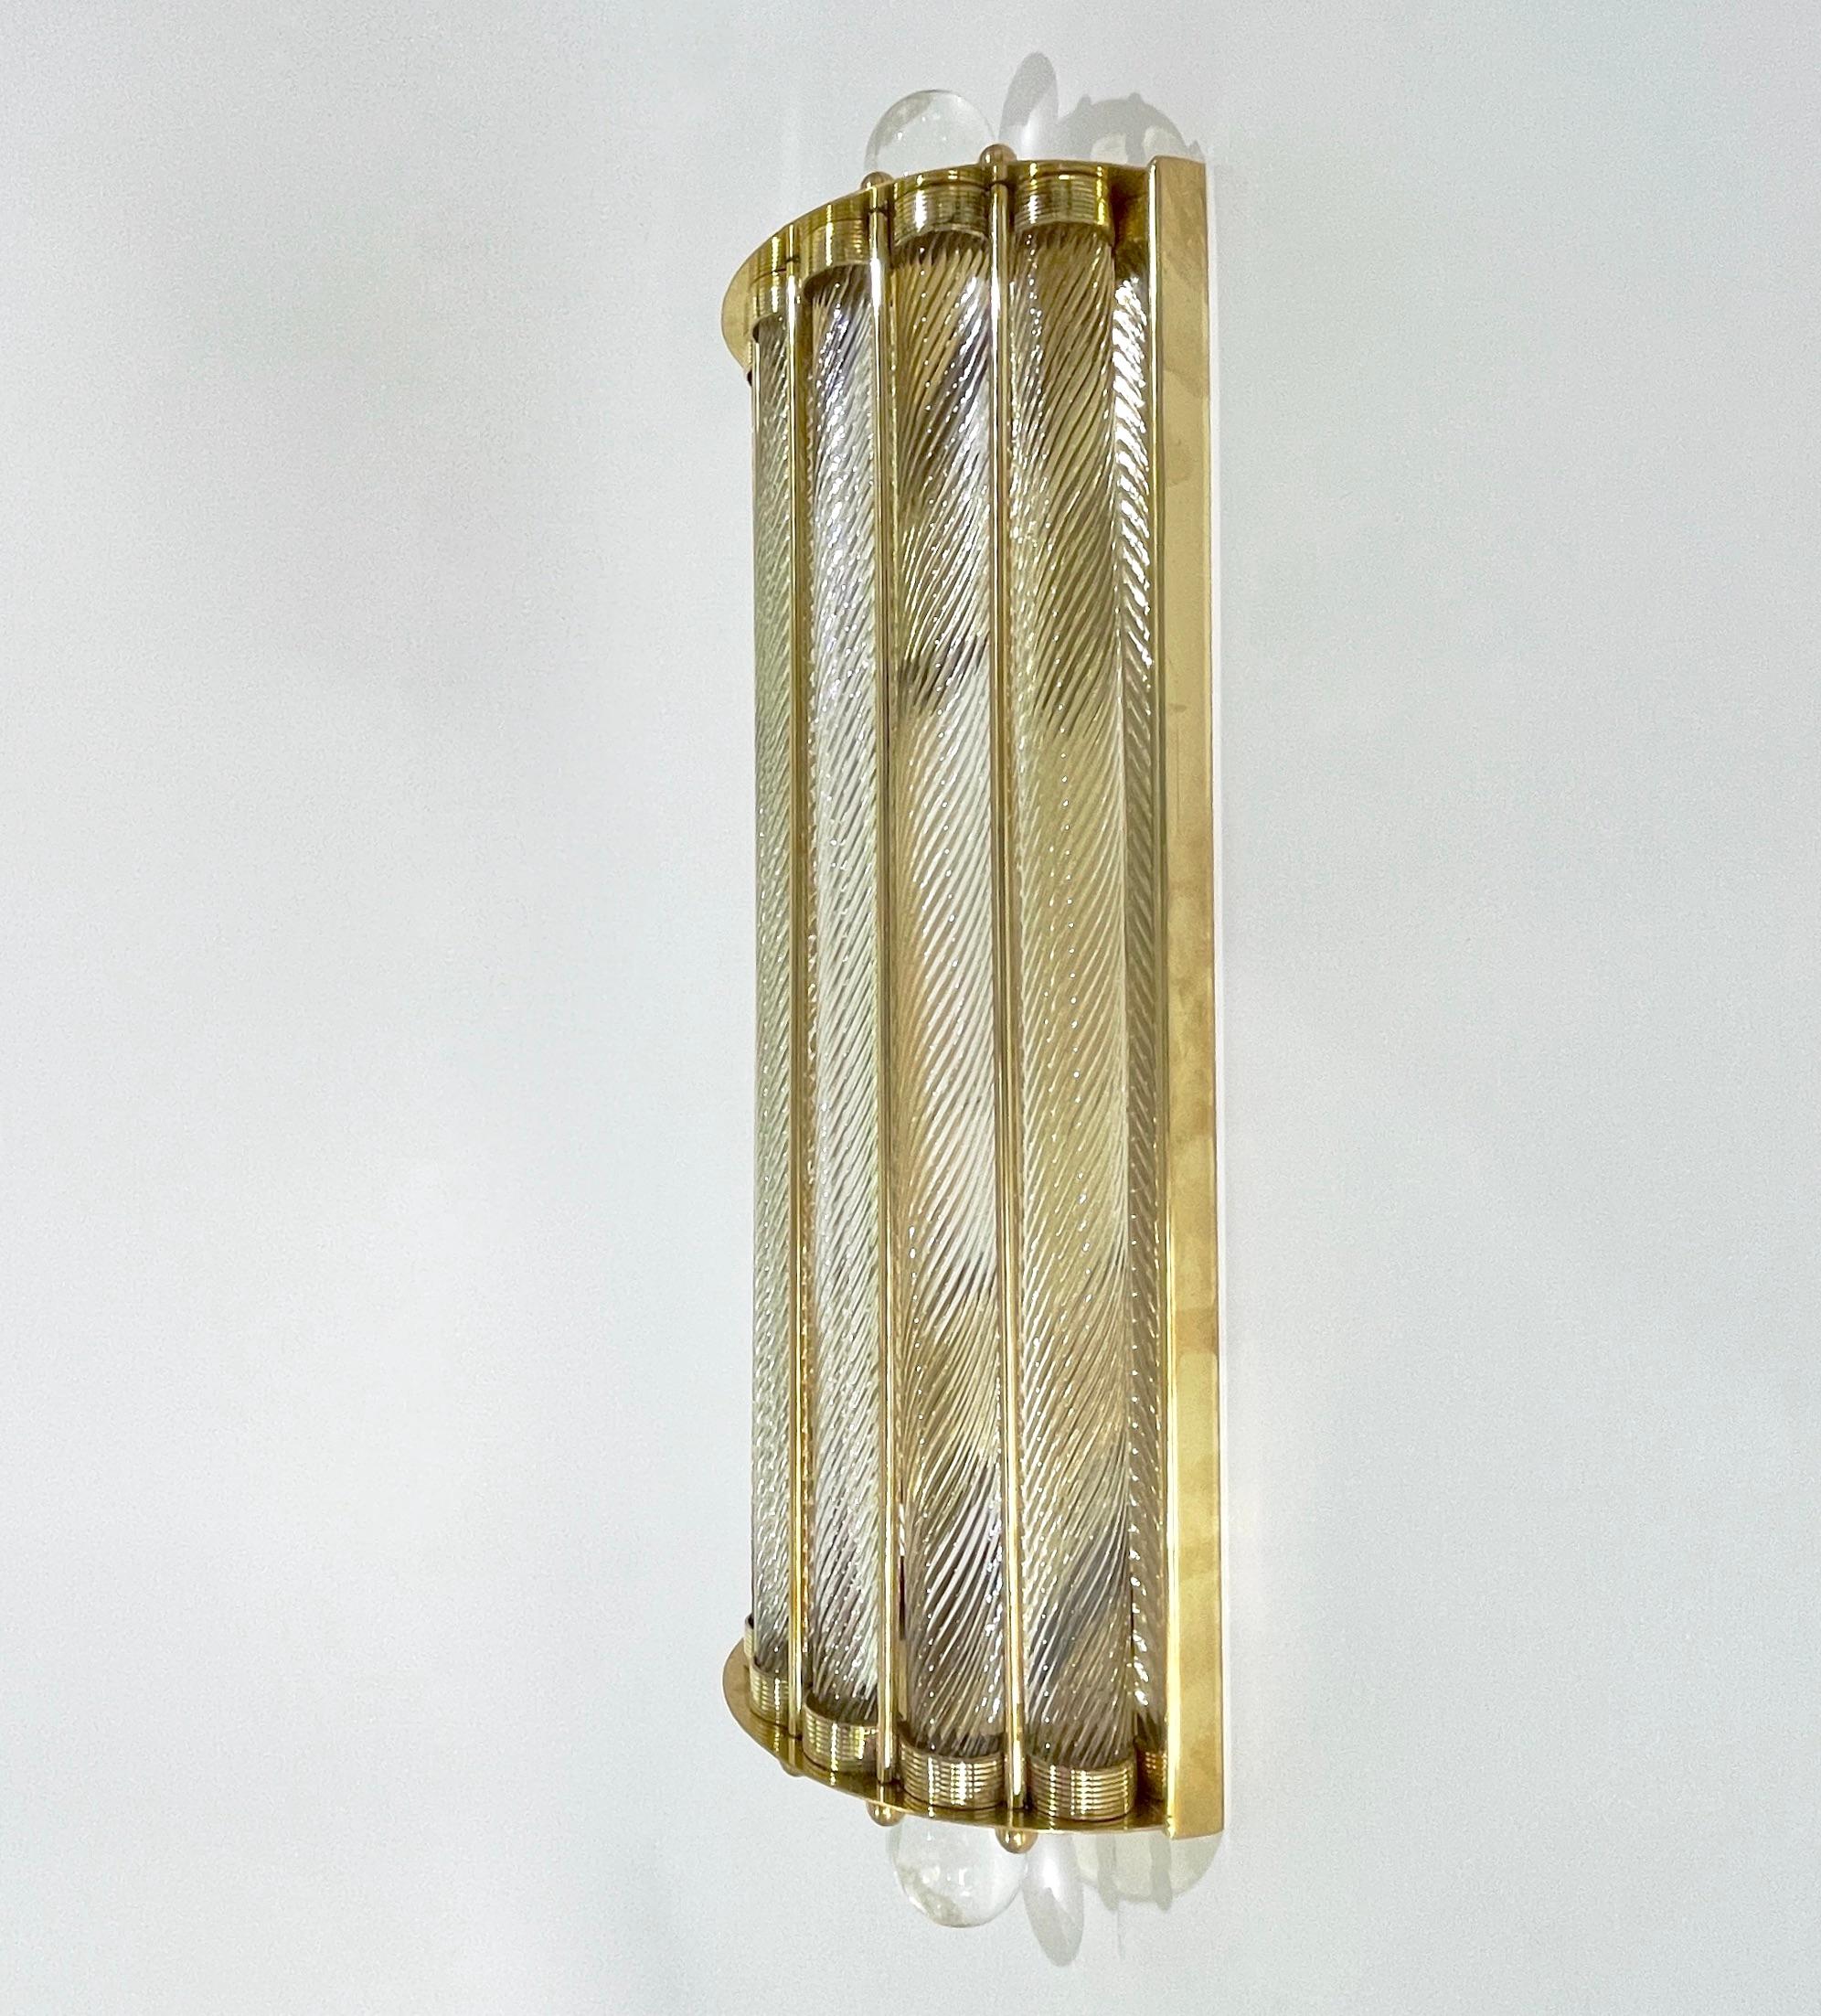 Hand-Crafted New Italian Art Deco Design Crystal Ball Murano Glass Half Moon Brass Sconces For Sale